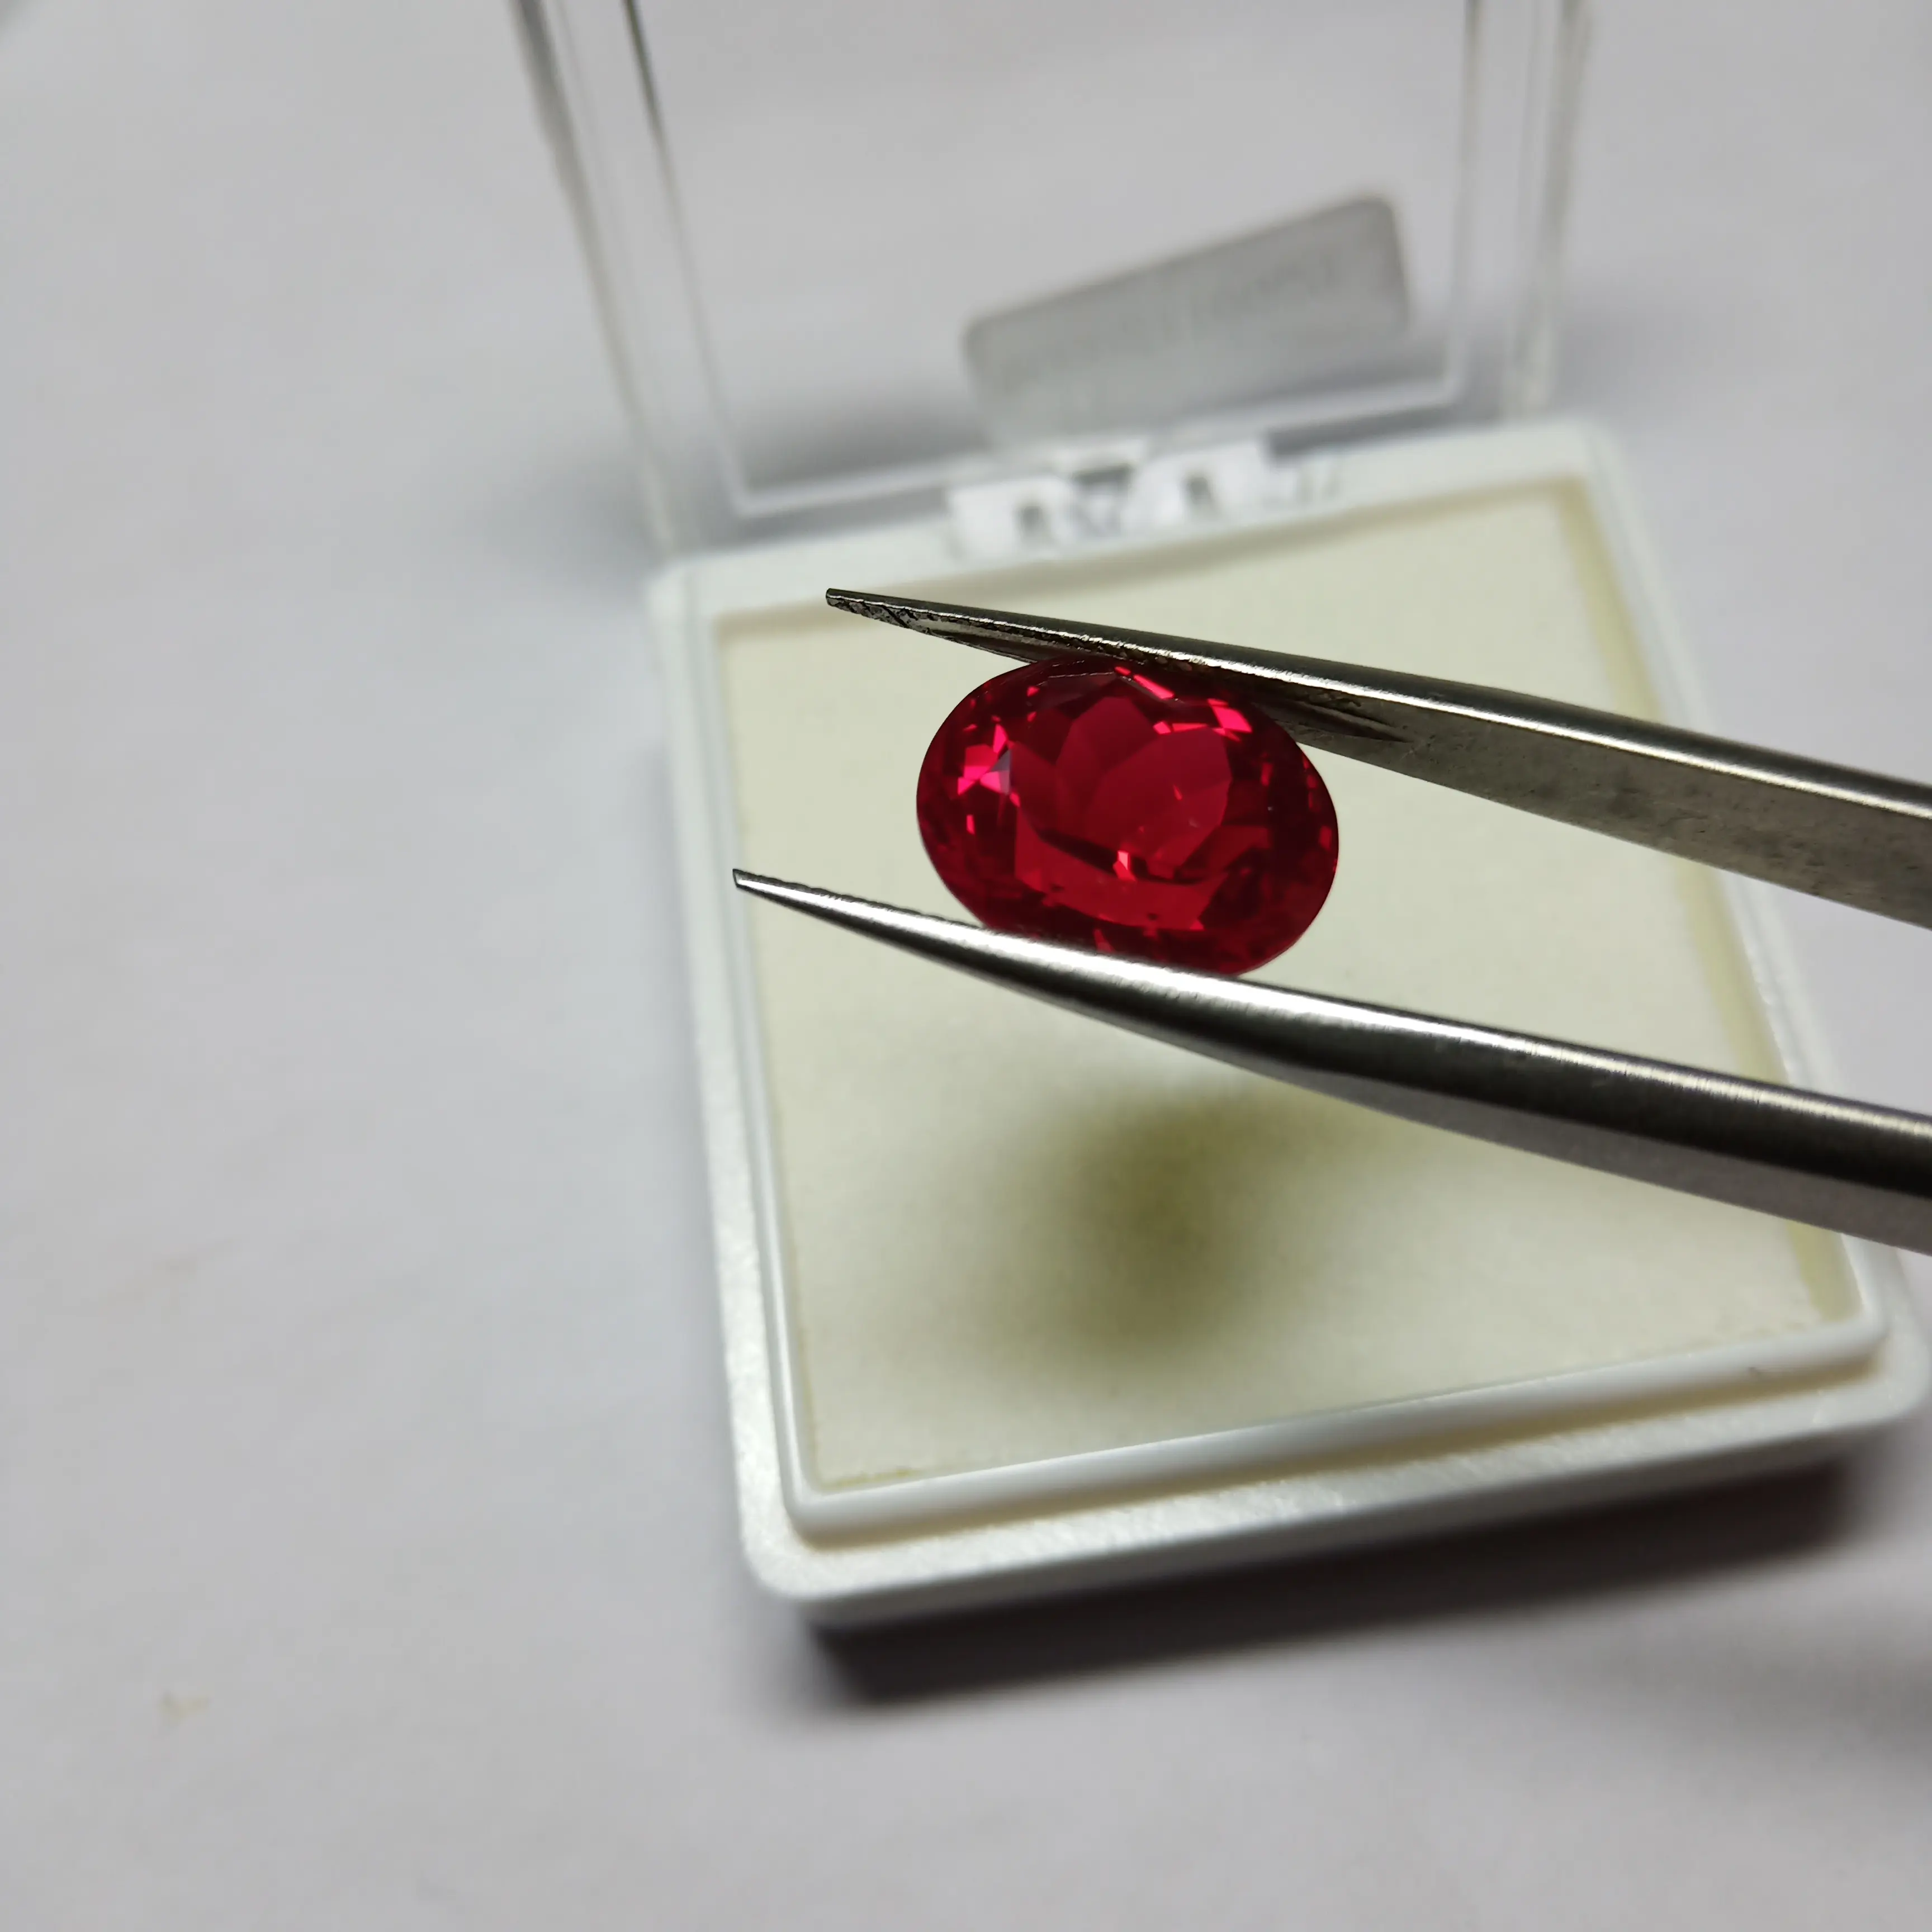 Lab Grown Burma Ruby Hydrothermal Ruby Per Carat Price for Ring and Necklace